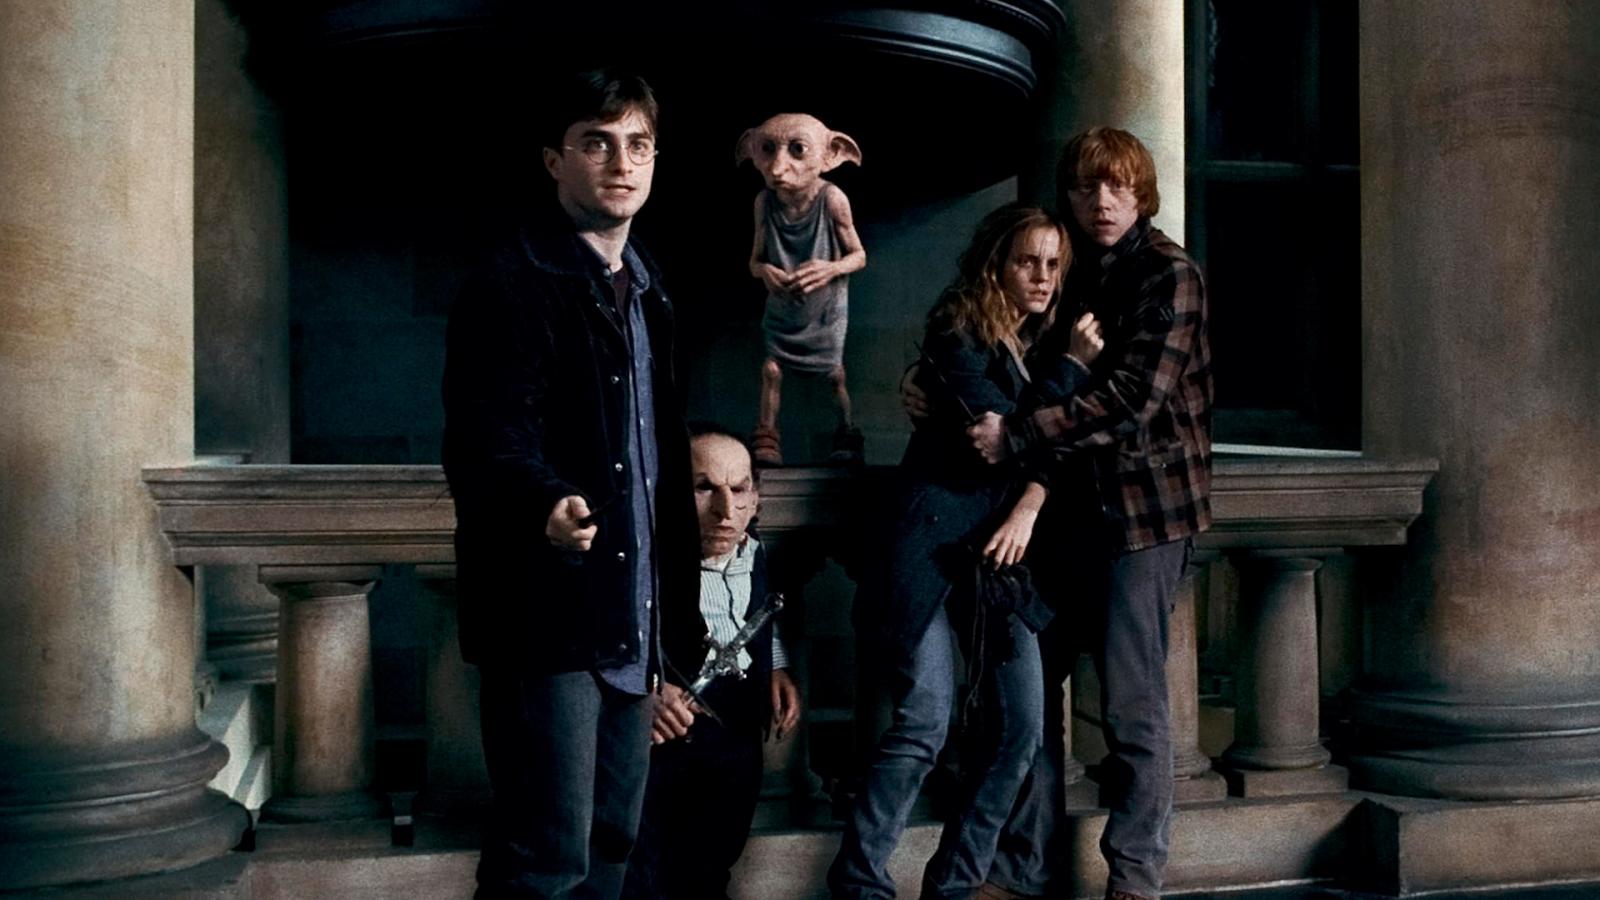 Daniel Radcliffe Officially Working on a New Harry Potter Project - image 1